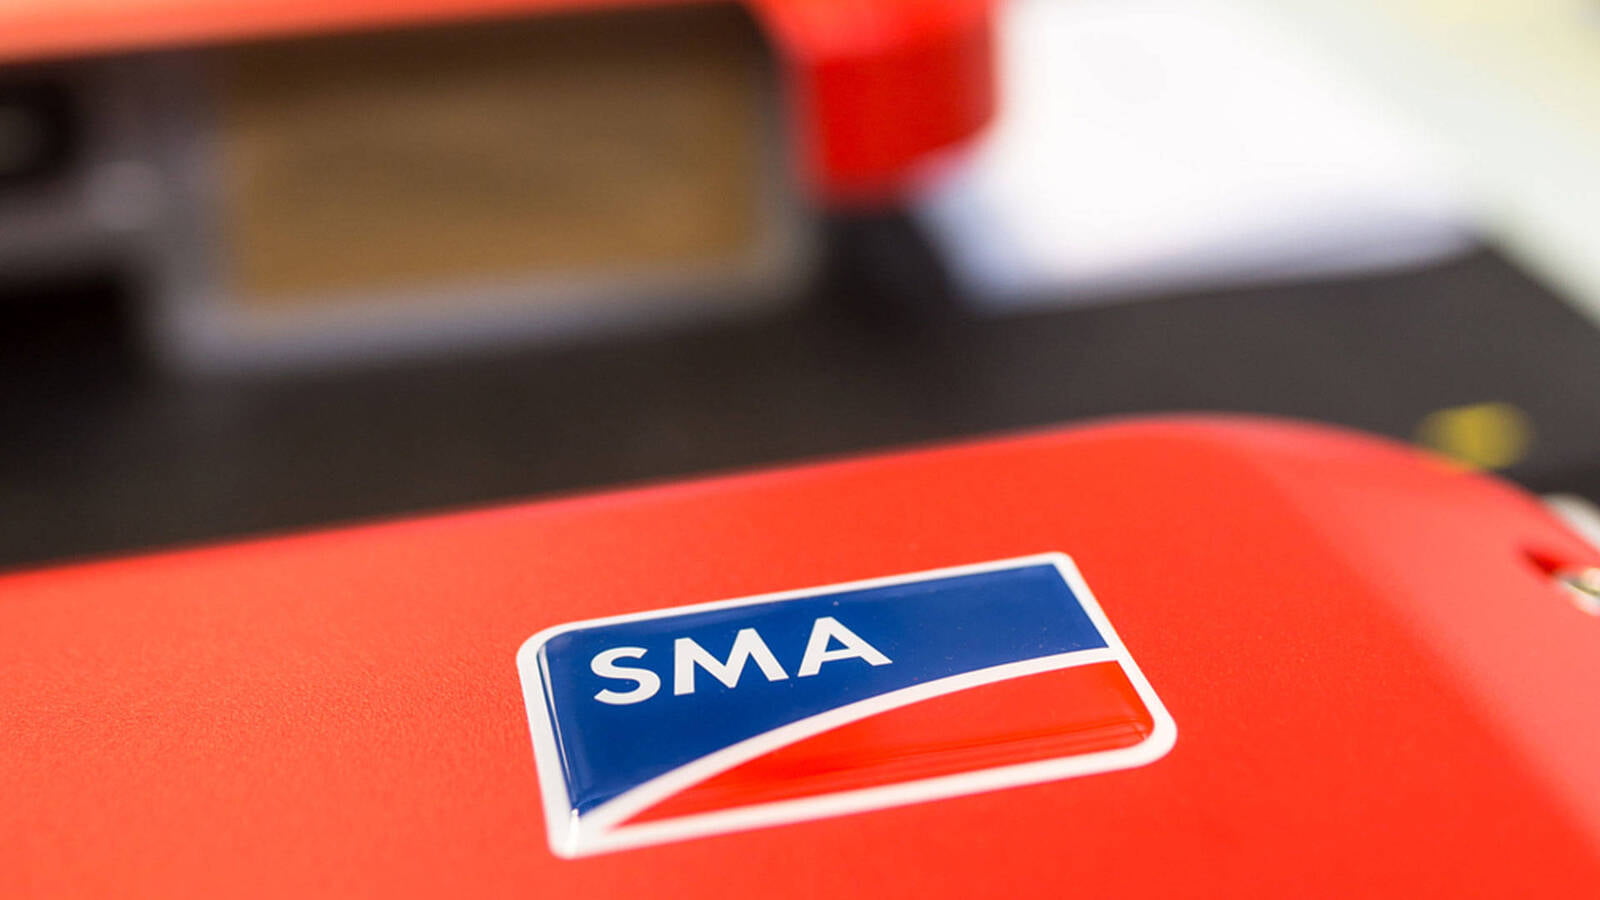 SMA Products: One Of The Biggest Brands In The World!